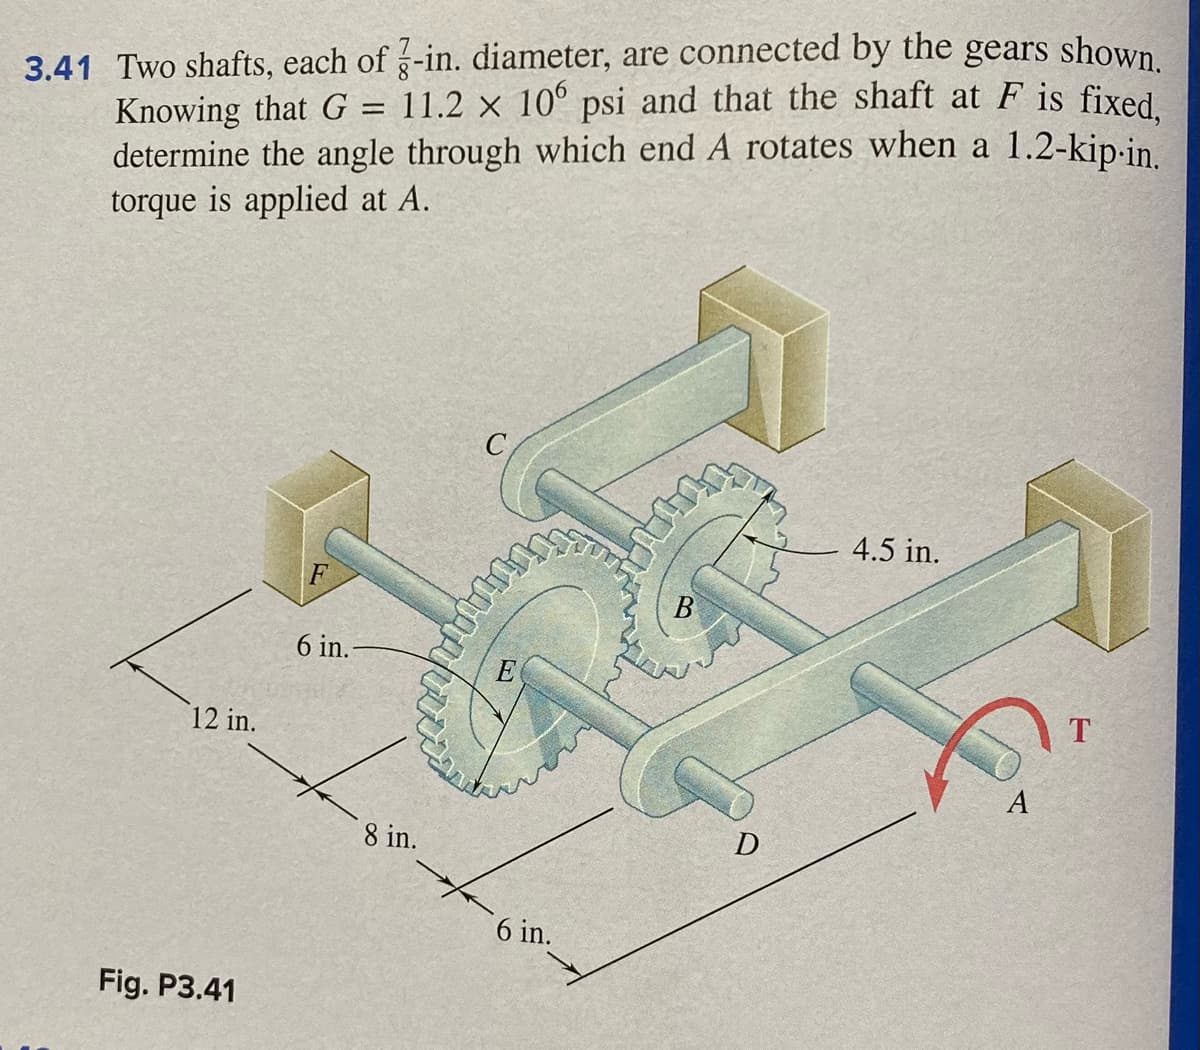 3.41 Two shafts, each of g-in. diameter, are connected by the gears shown
Knowing that G =
determine the angle through which end A rotates when a 1.2-kip-in.
torque is applied at A.
11.2 × 10° psi and that the shaft at F is fixed
4.5 in.
F
В
6 in.
E
12 in.
T
A
8 in.
6 in.
Fig. P3.41
